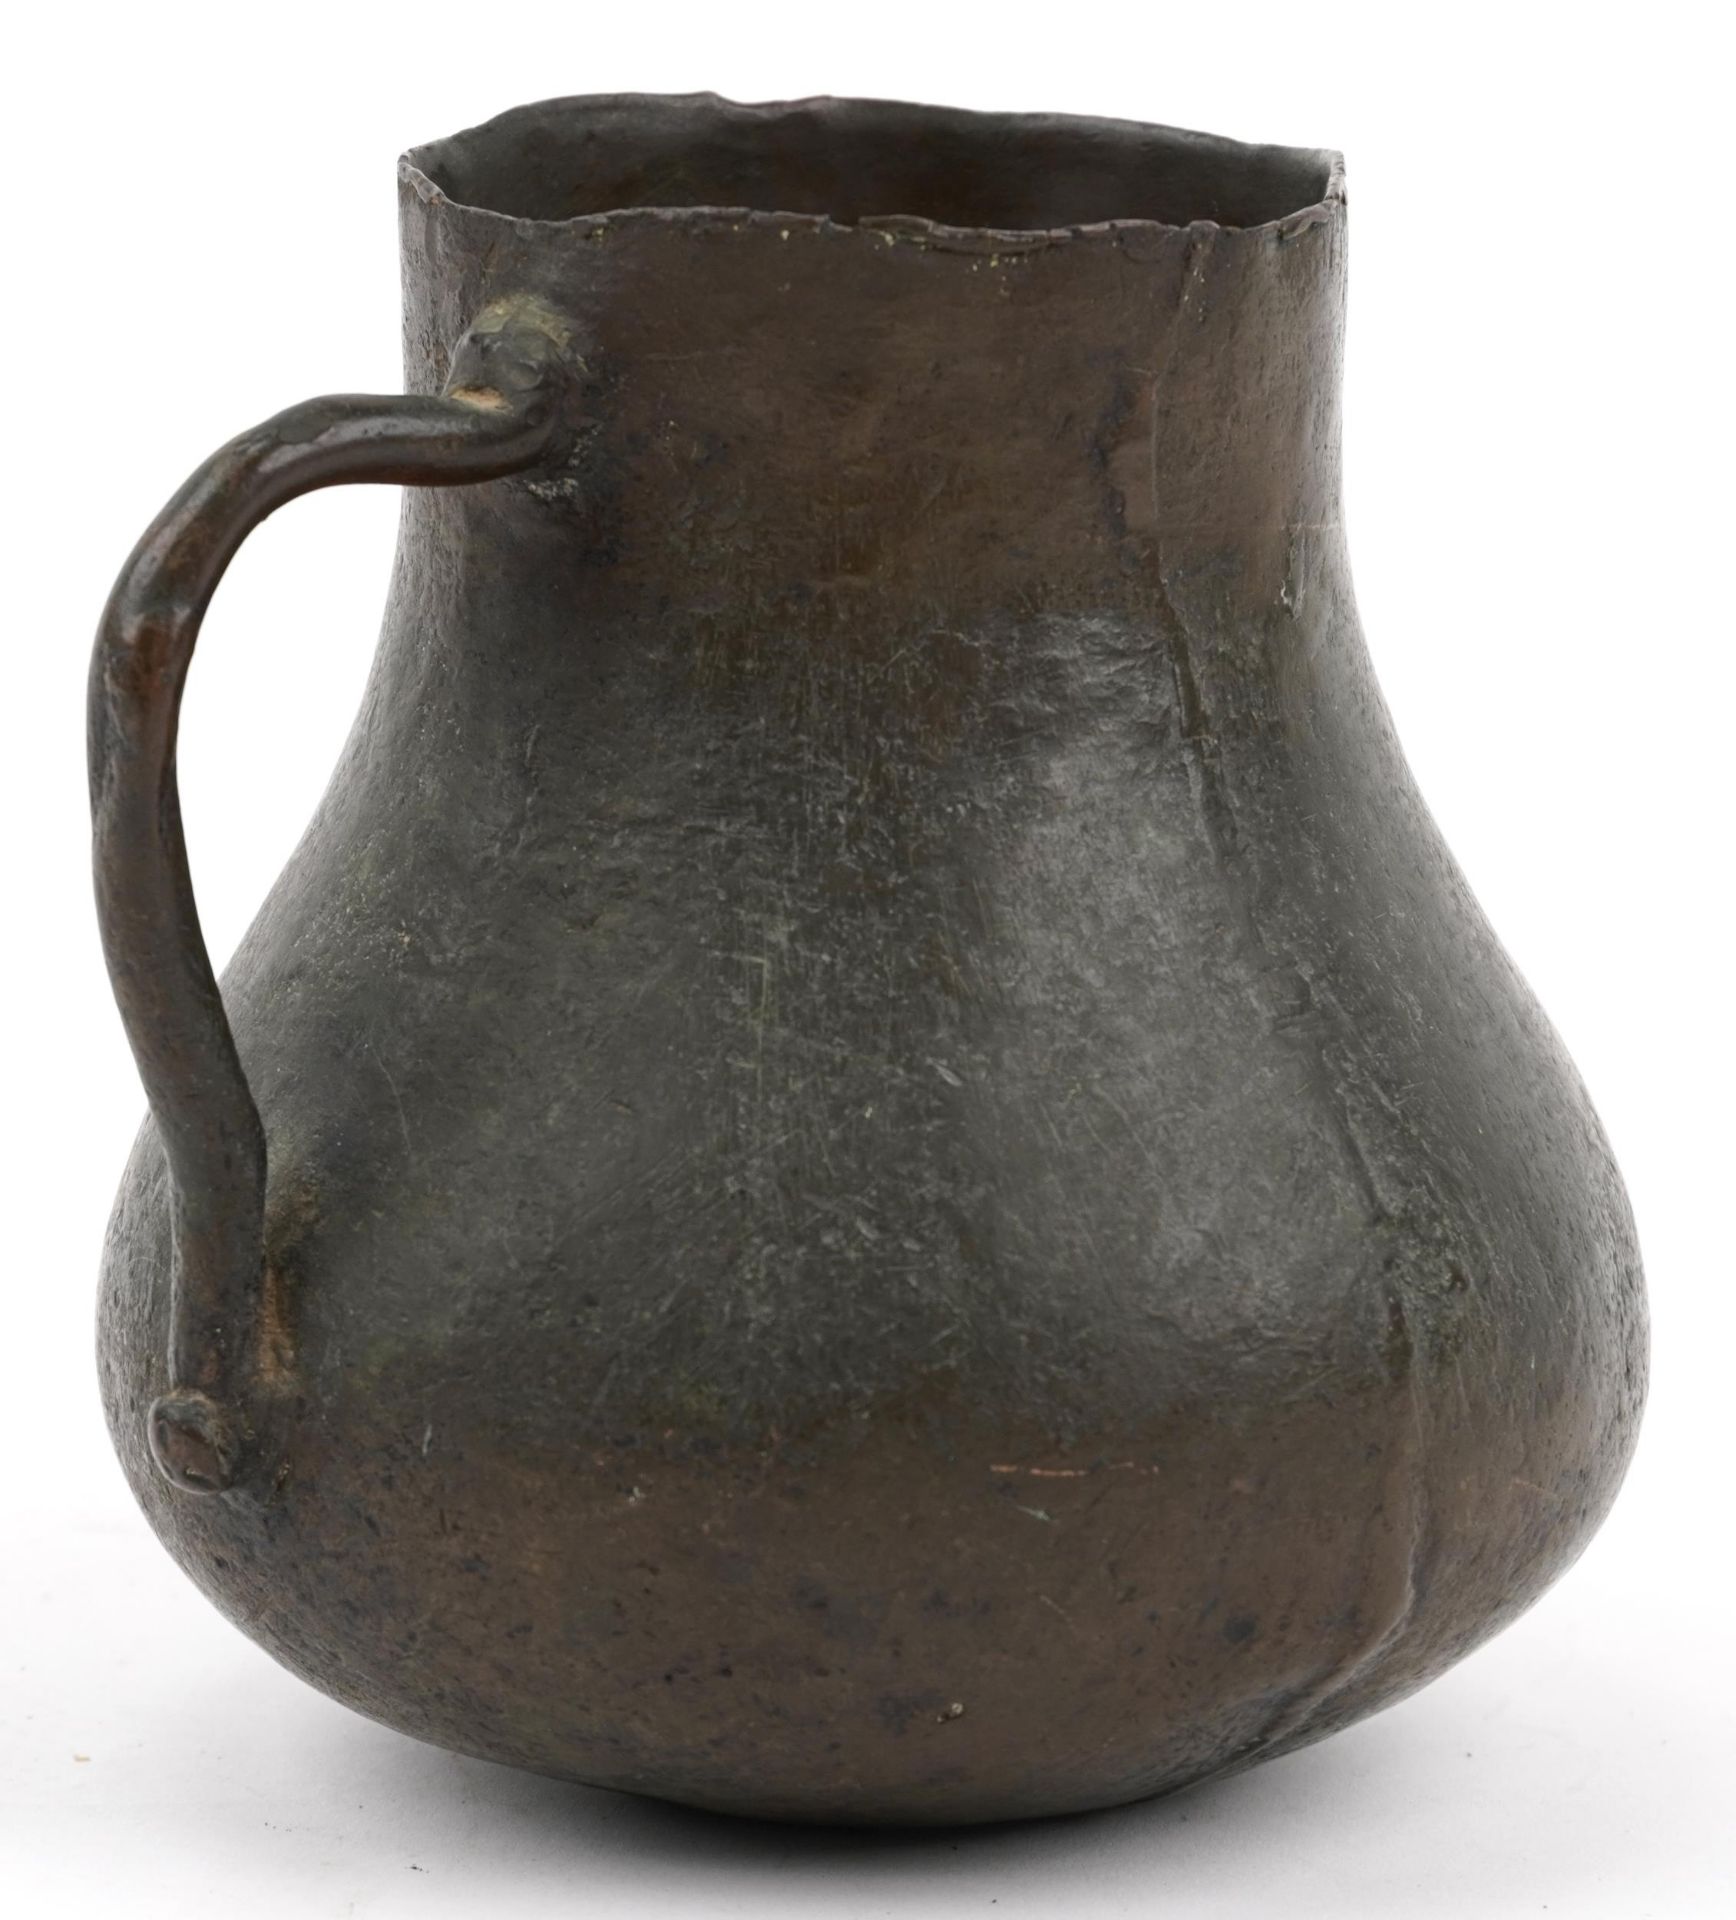 Antique bronze handled cup, possibly medieval, 14cm high : For further information on this lot - Image 2 of 3